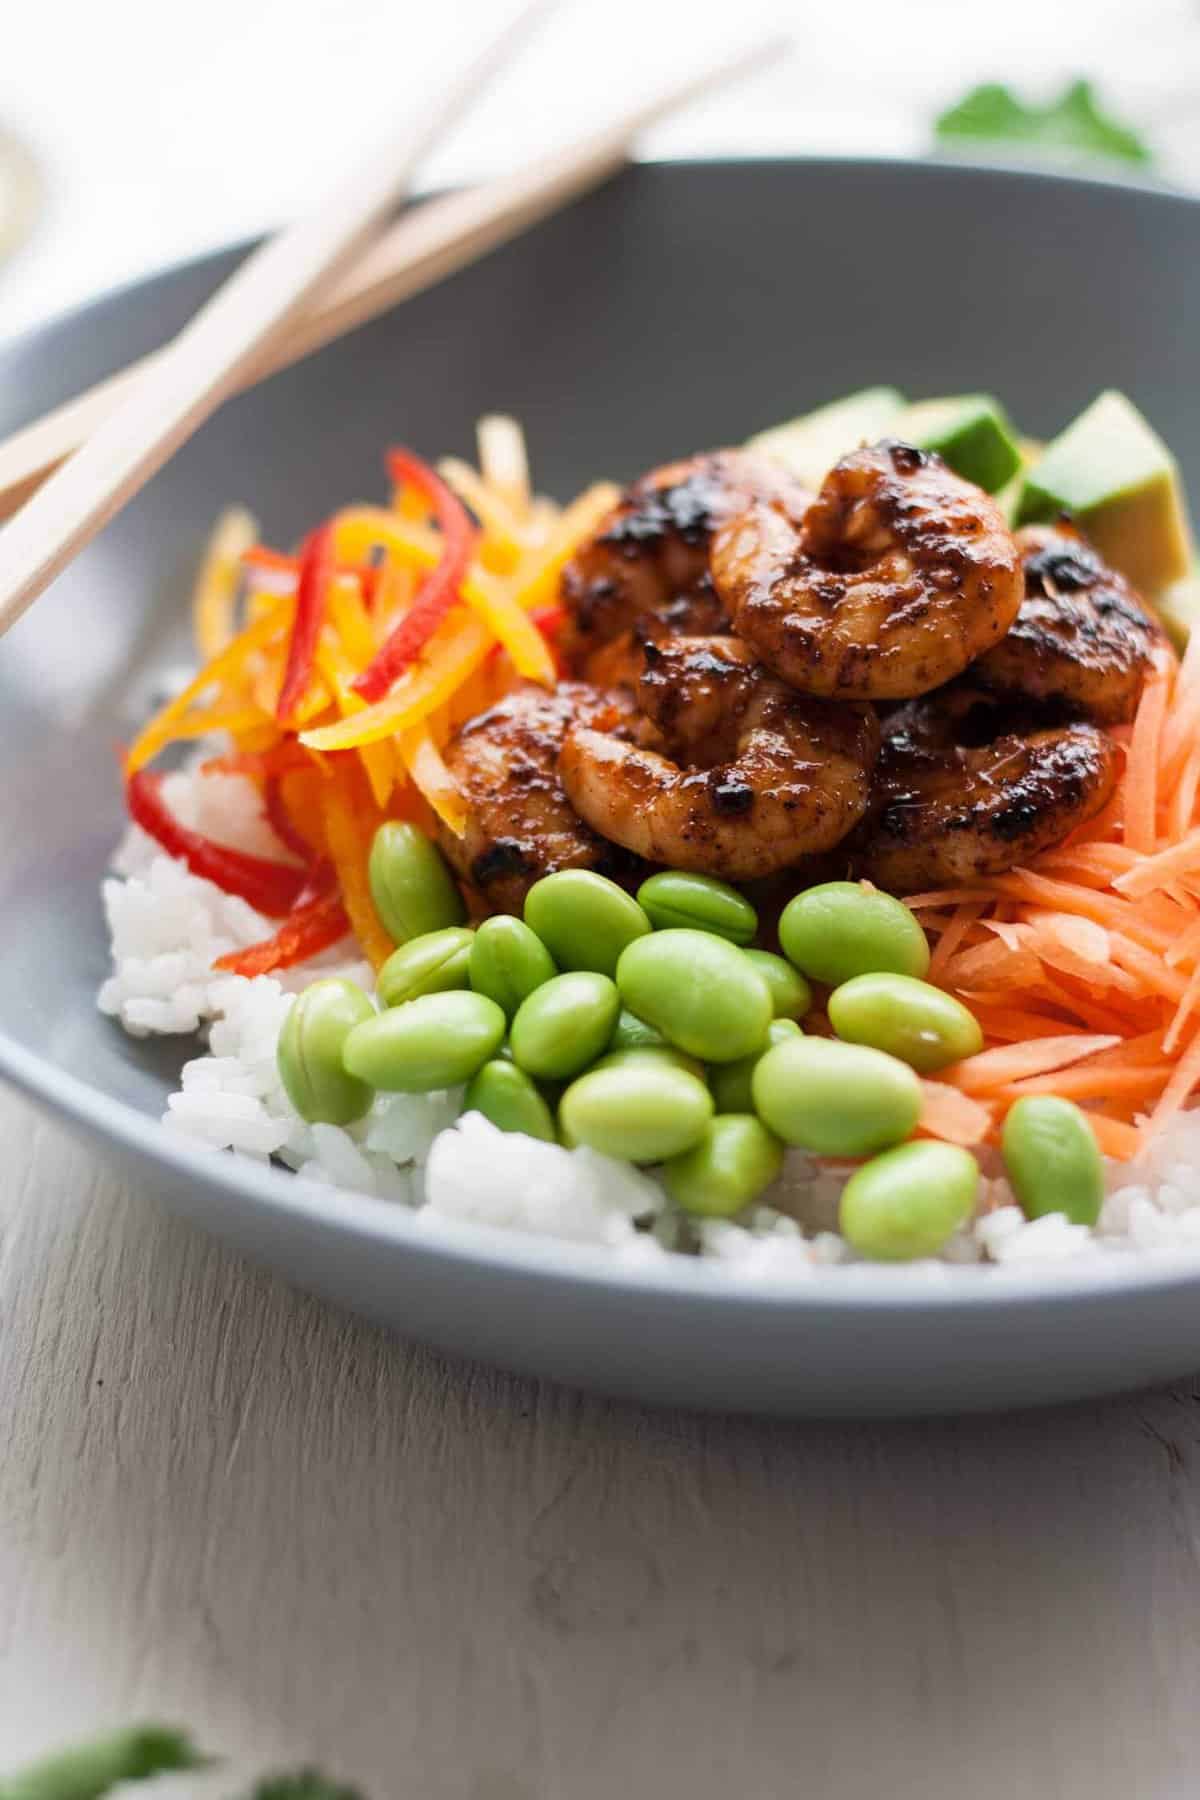 Spicy prawns on top of veggies and rice in a bowl with chopsticks.